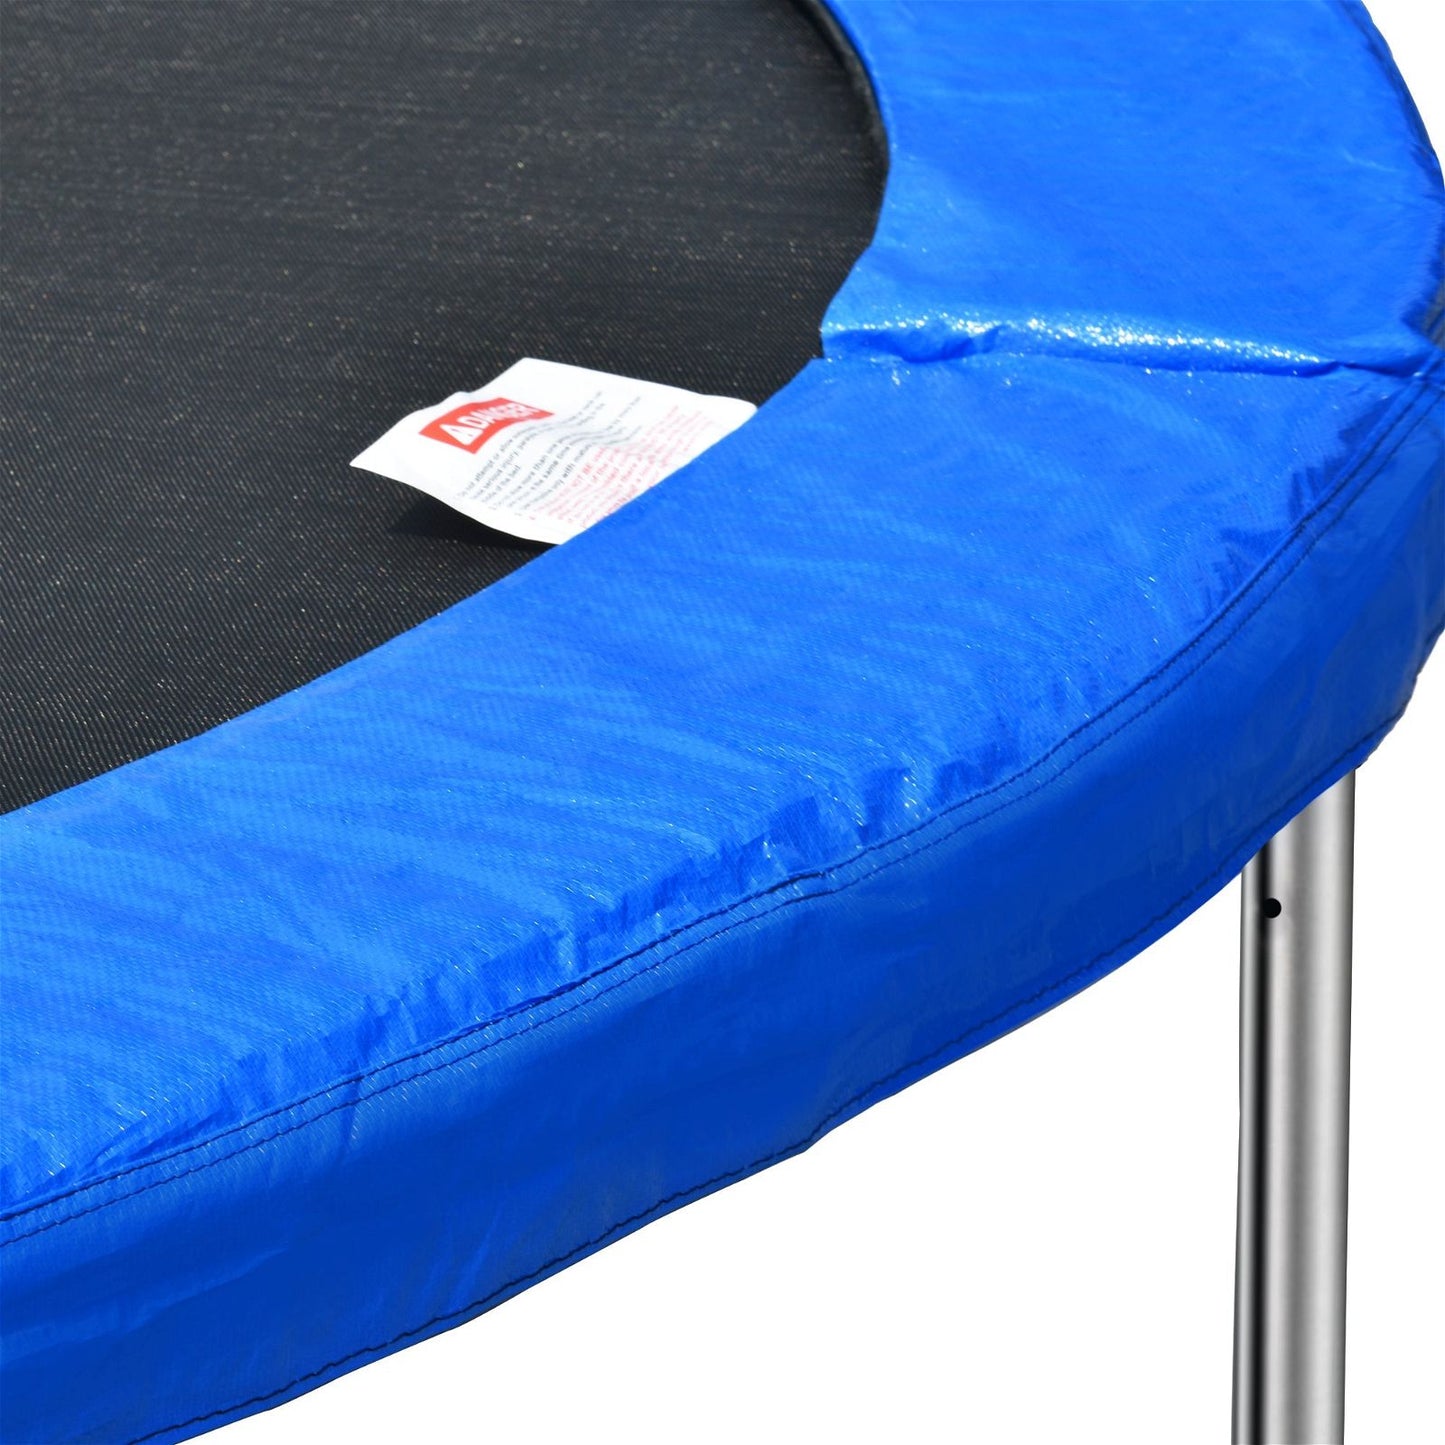 14FT Trampoline for Adults & Kids with Basketball Hoop Outdoor - Luceroclub.com